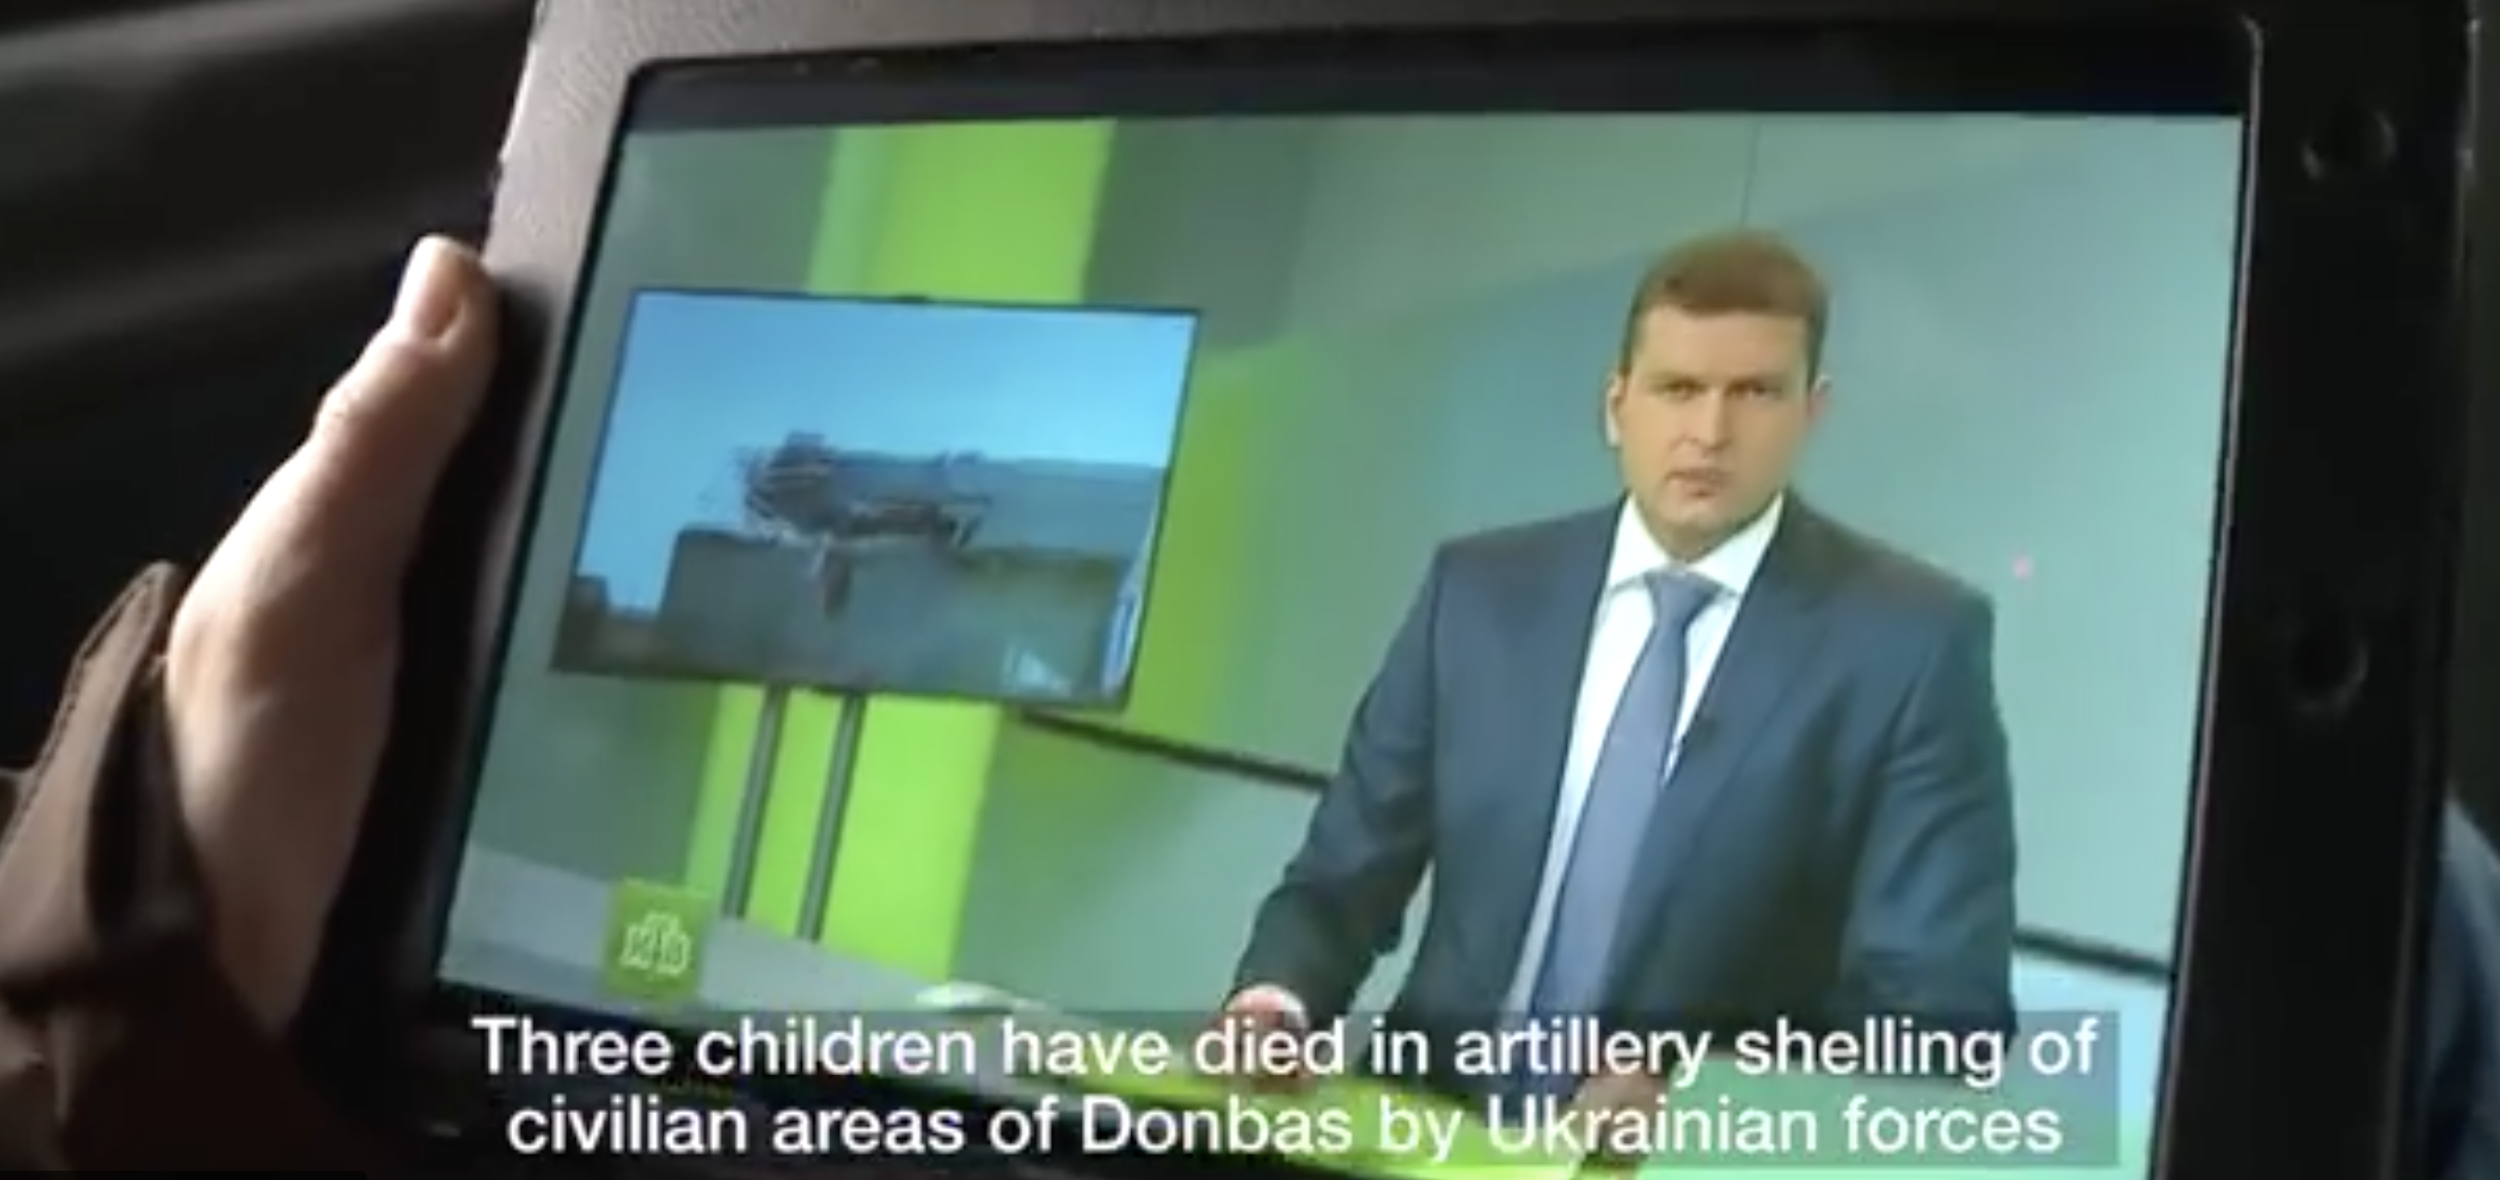 In April 2015, Gazprom-Media’s NTV claimed that “A ten-year-old girl has been killed by Ukrainian government forces in Eastern Ukraine”. Later, NTV producers confessed to the BBC that the story had been entirely made up without knowing that they were on camera. ~